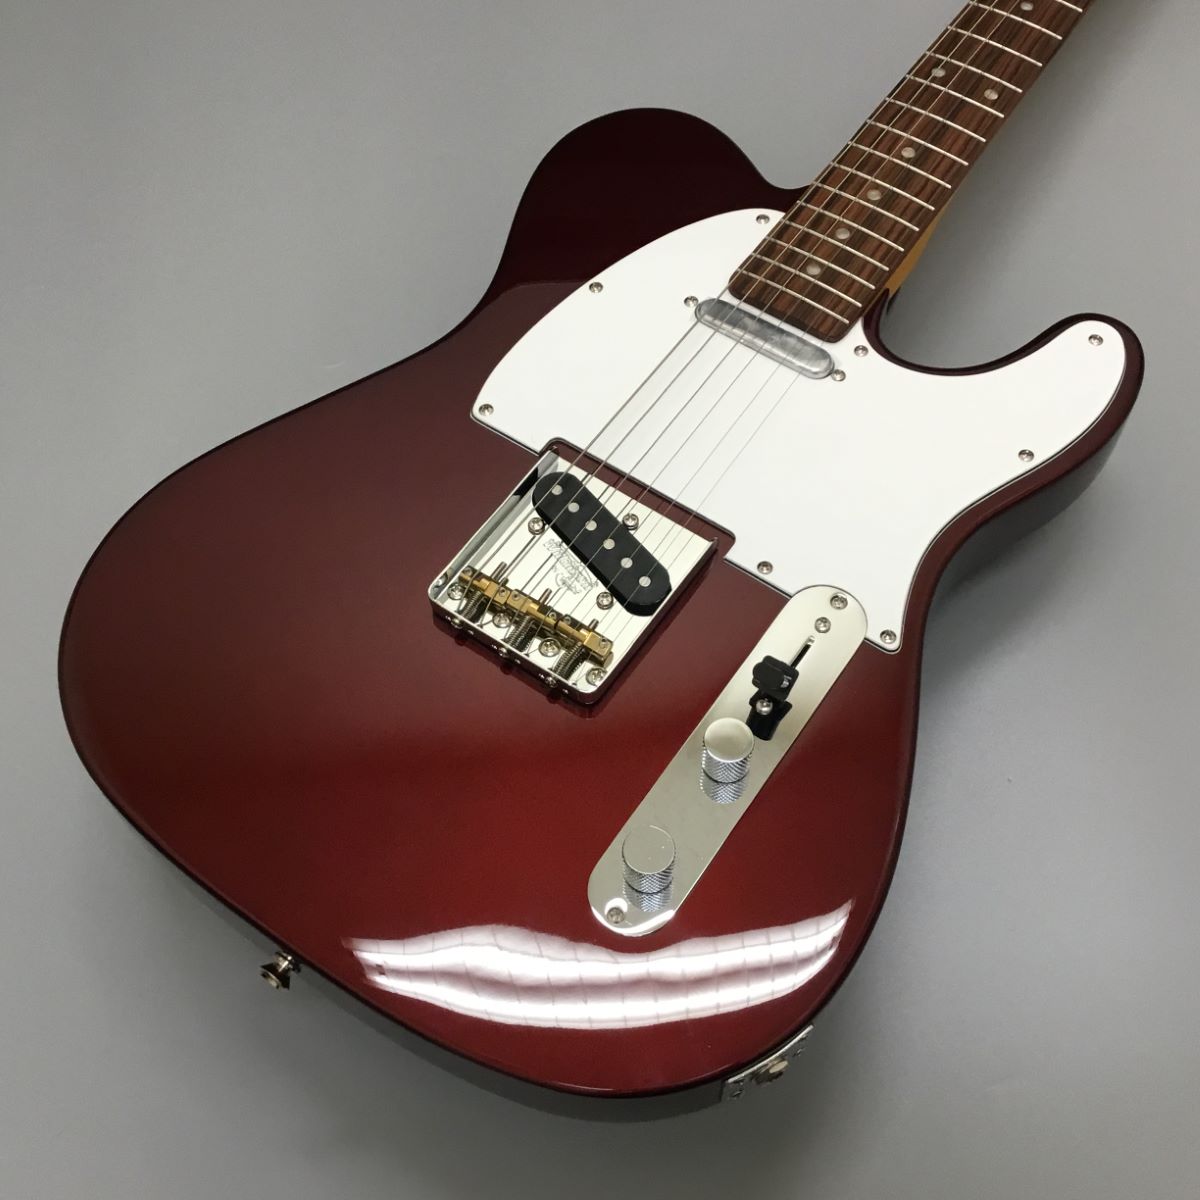 HISTORY HTL-Performance Bordeaux Red エレキギター【現物写真